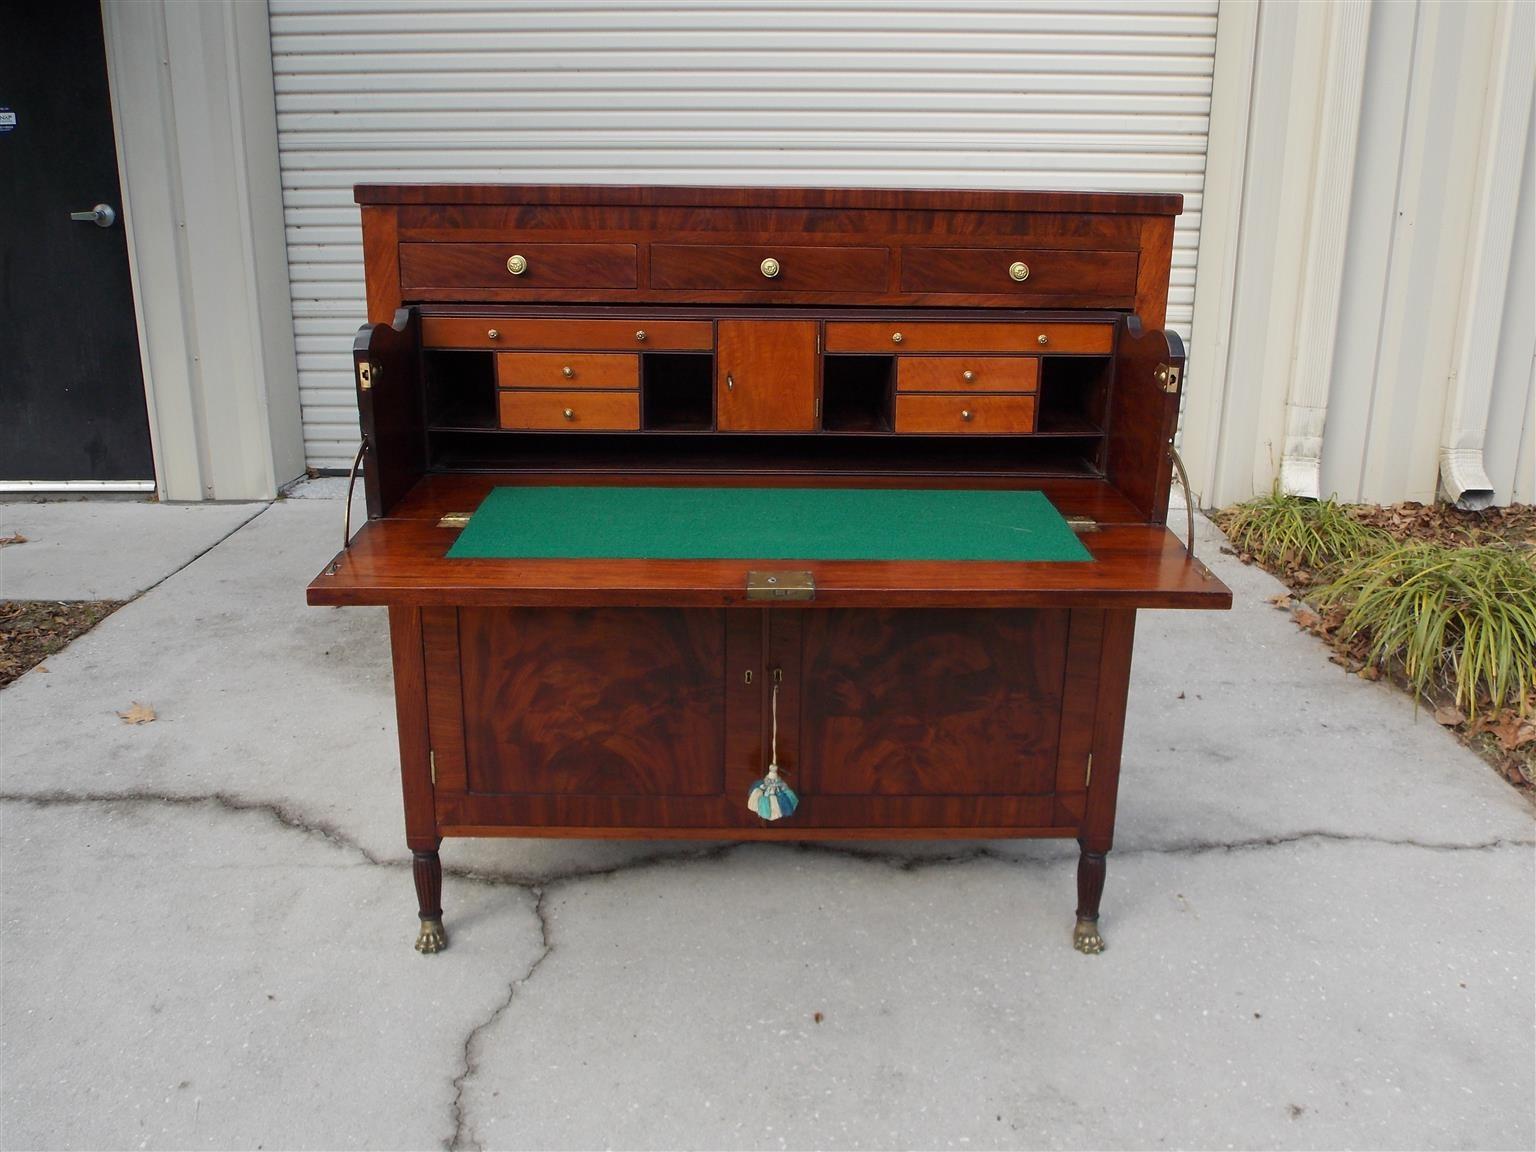 American Federal mahogany butler's desk with a carved molded edge, three upper drawers with original brass knobs, sliding fall front interior desk with Satinwood drawers and pigeon holes, baize writing surface, two lower book matched mahogany